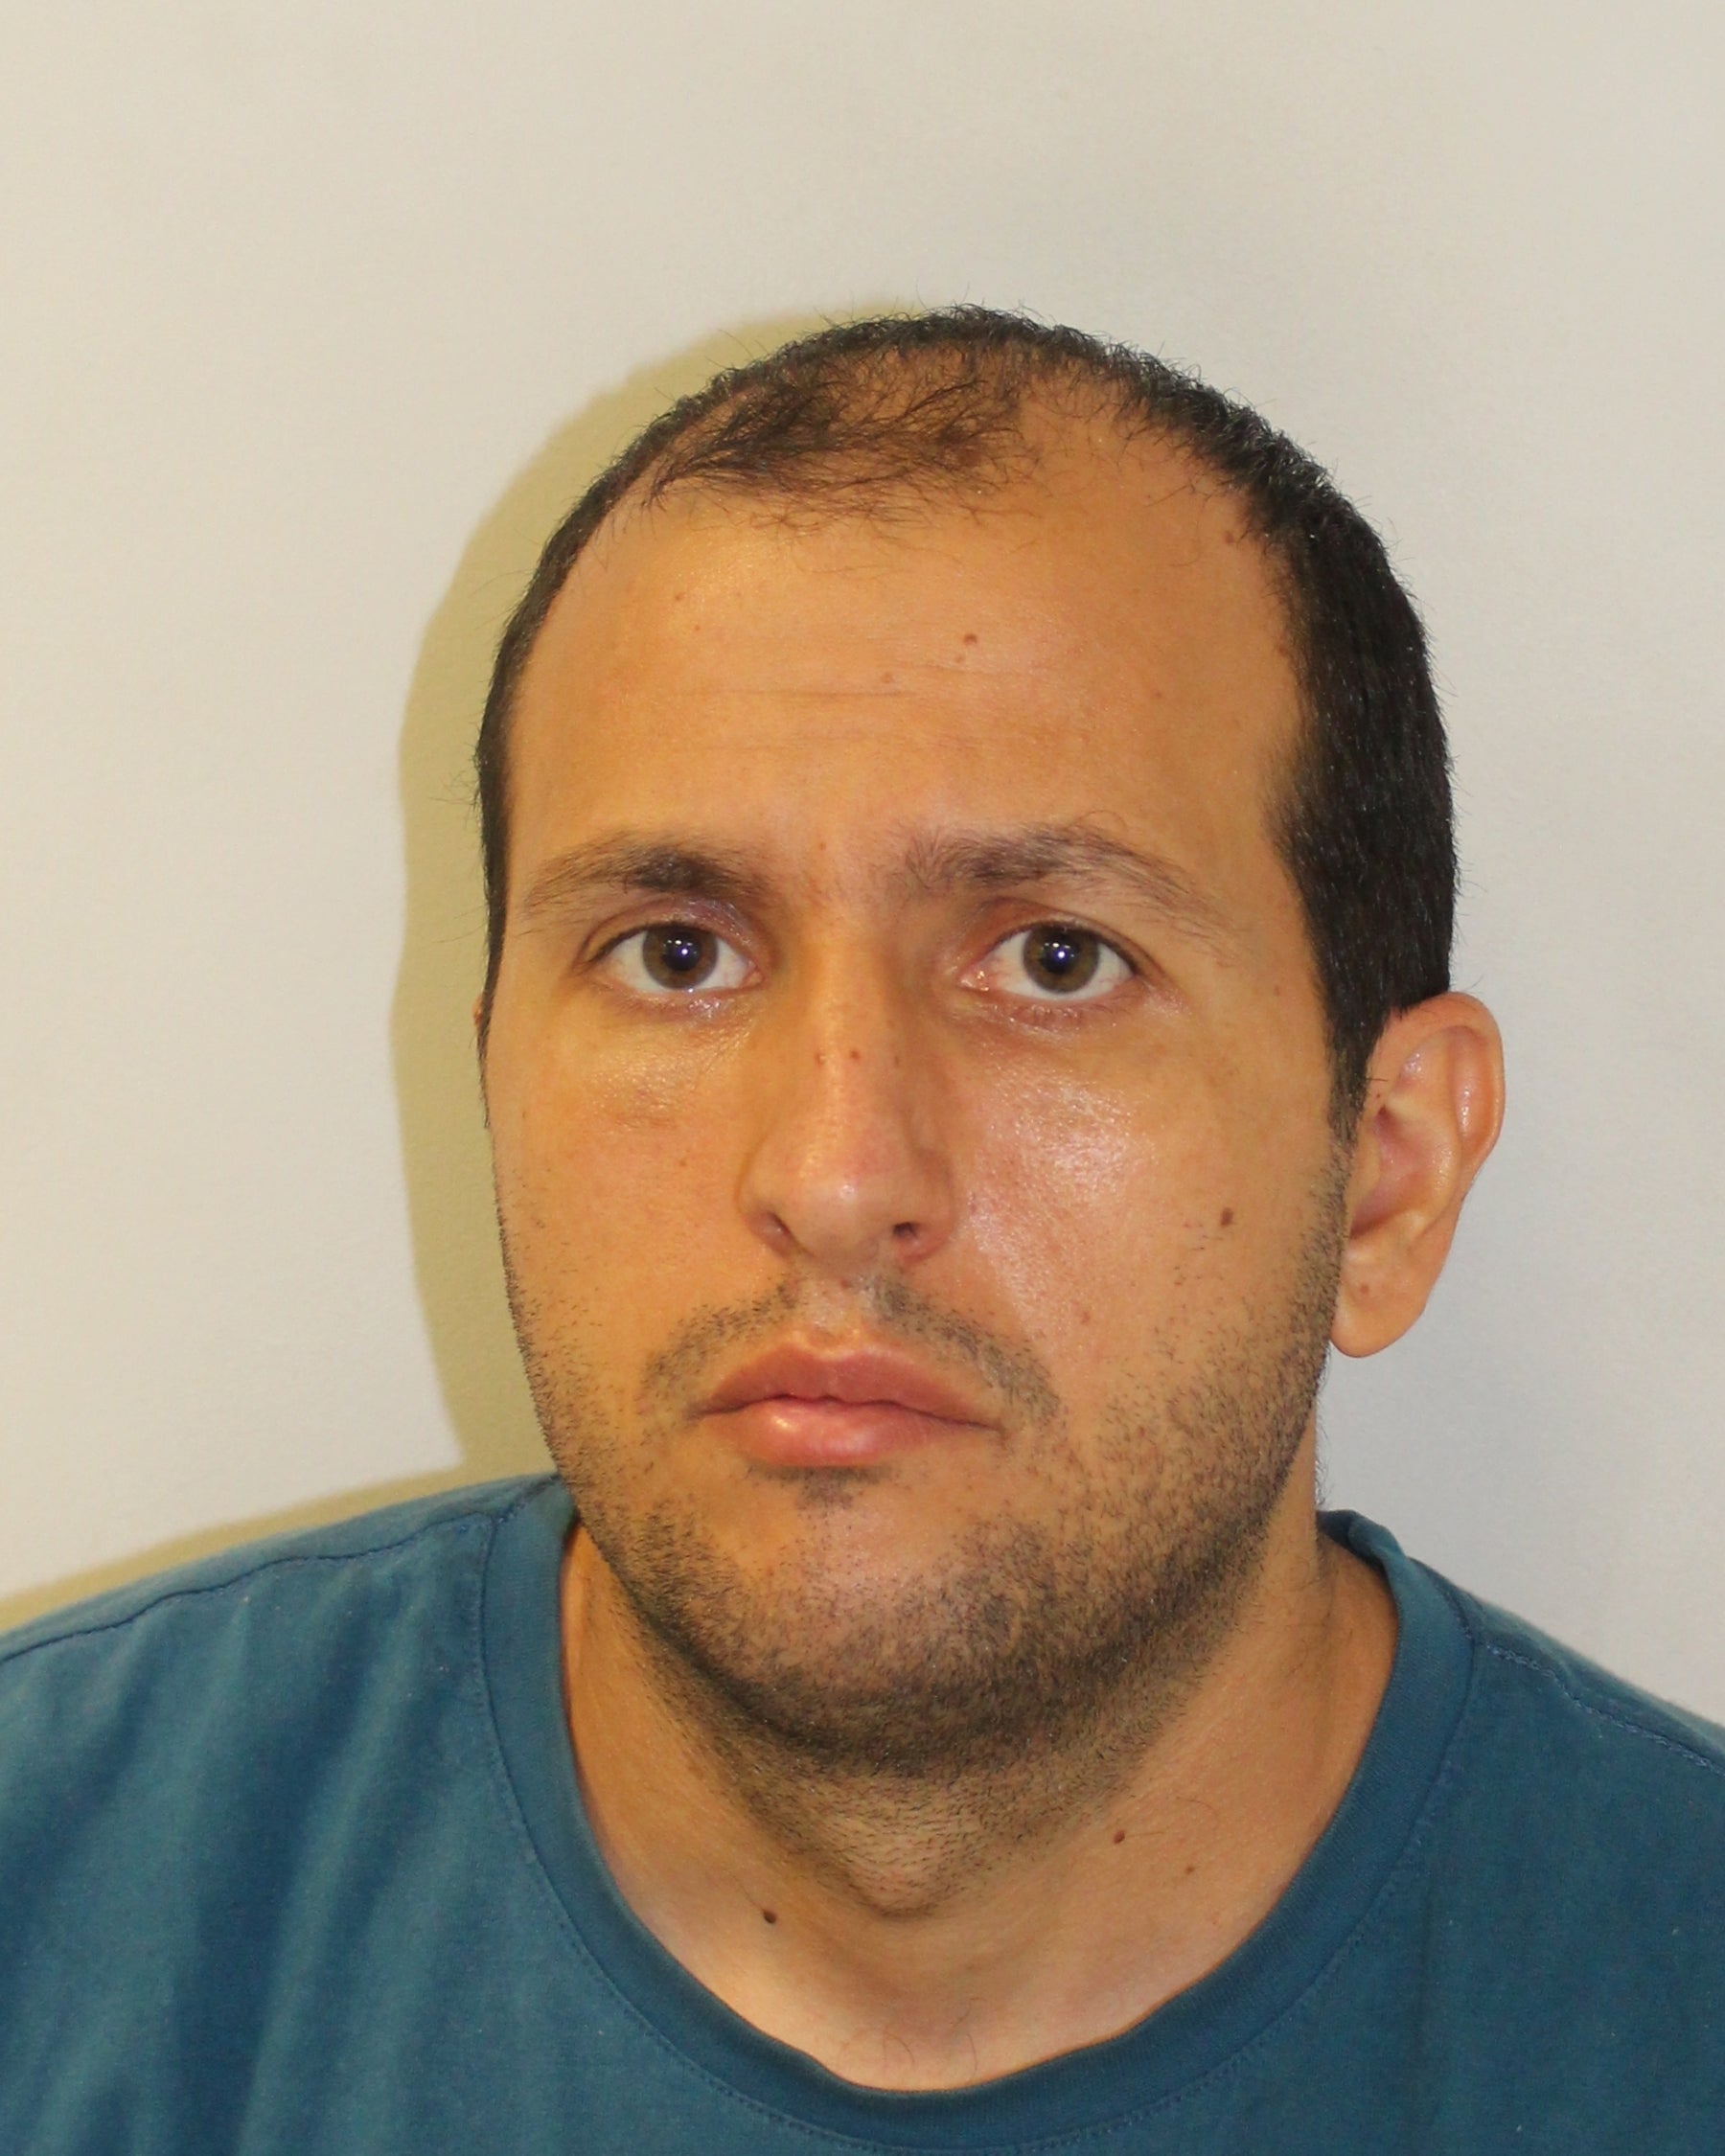 Koci Selamaj refused to attend his sentencing at the Old Bailey